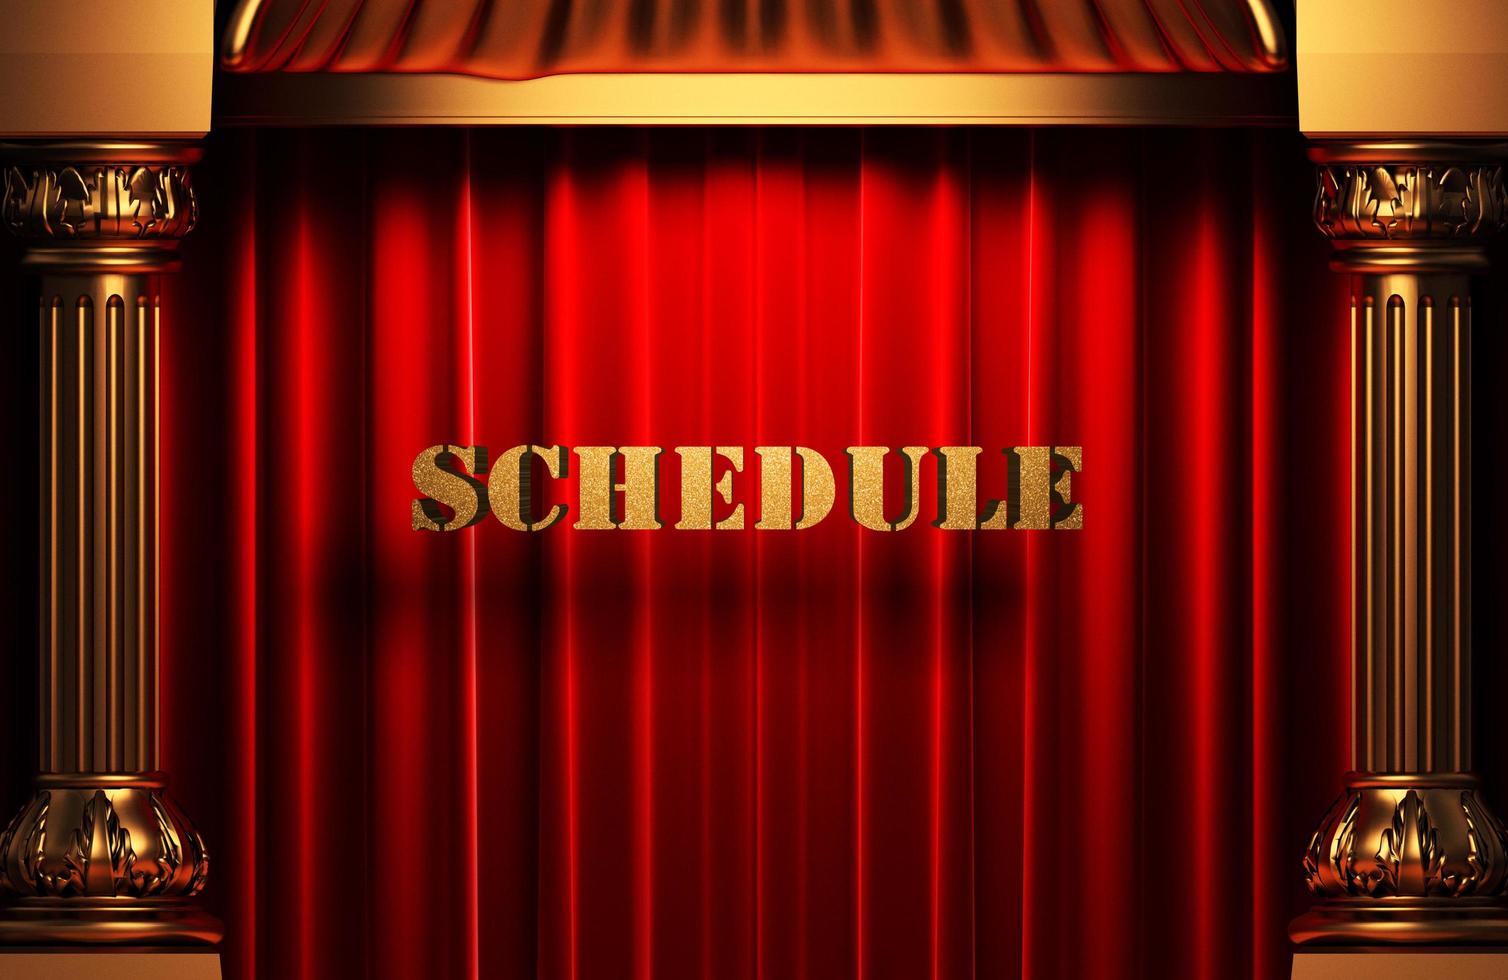 schedule golden word on red curtain photo